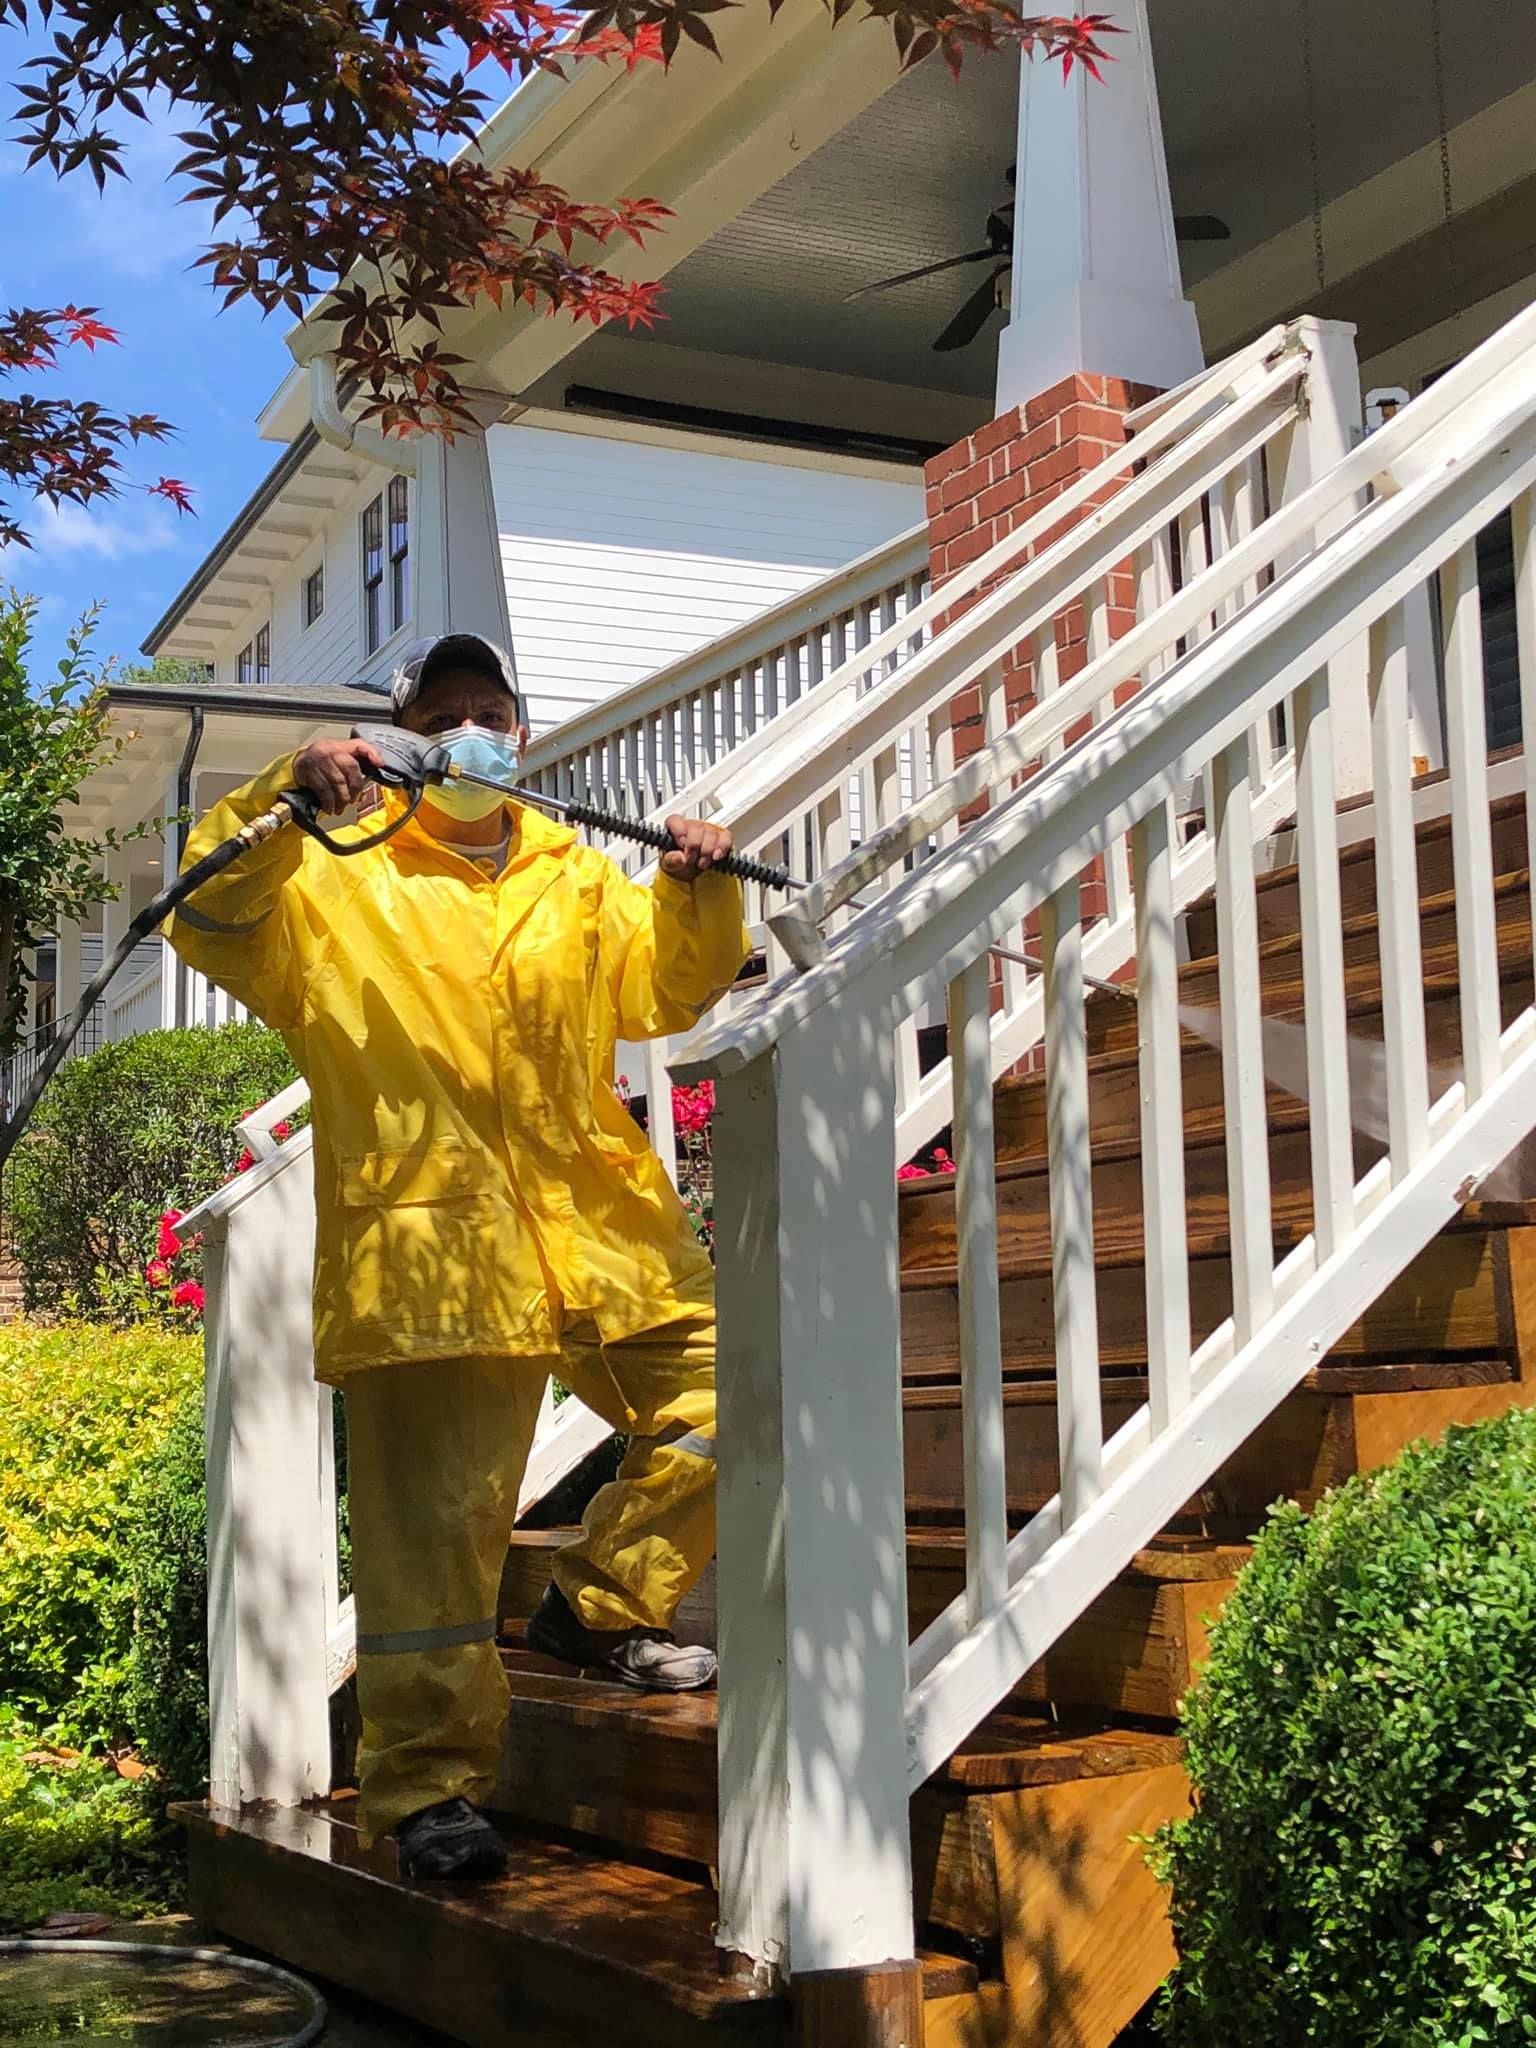 Our pressure washing service is perfect for removing built-up dirt, grime, and other debris from the surfaces of your home. We use high-pressure water to blast away all the unwanted material quickly and safely, leaving your home looking clean and new again. for Euro Pro Painting Company in Lawerenceville, GA